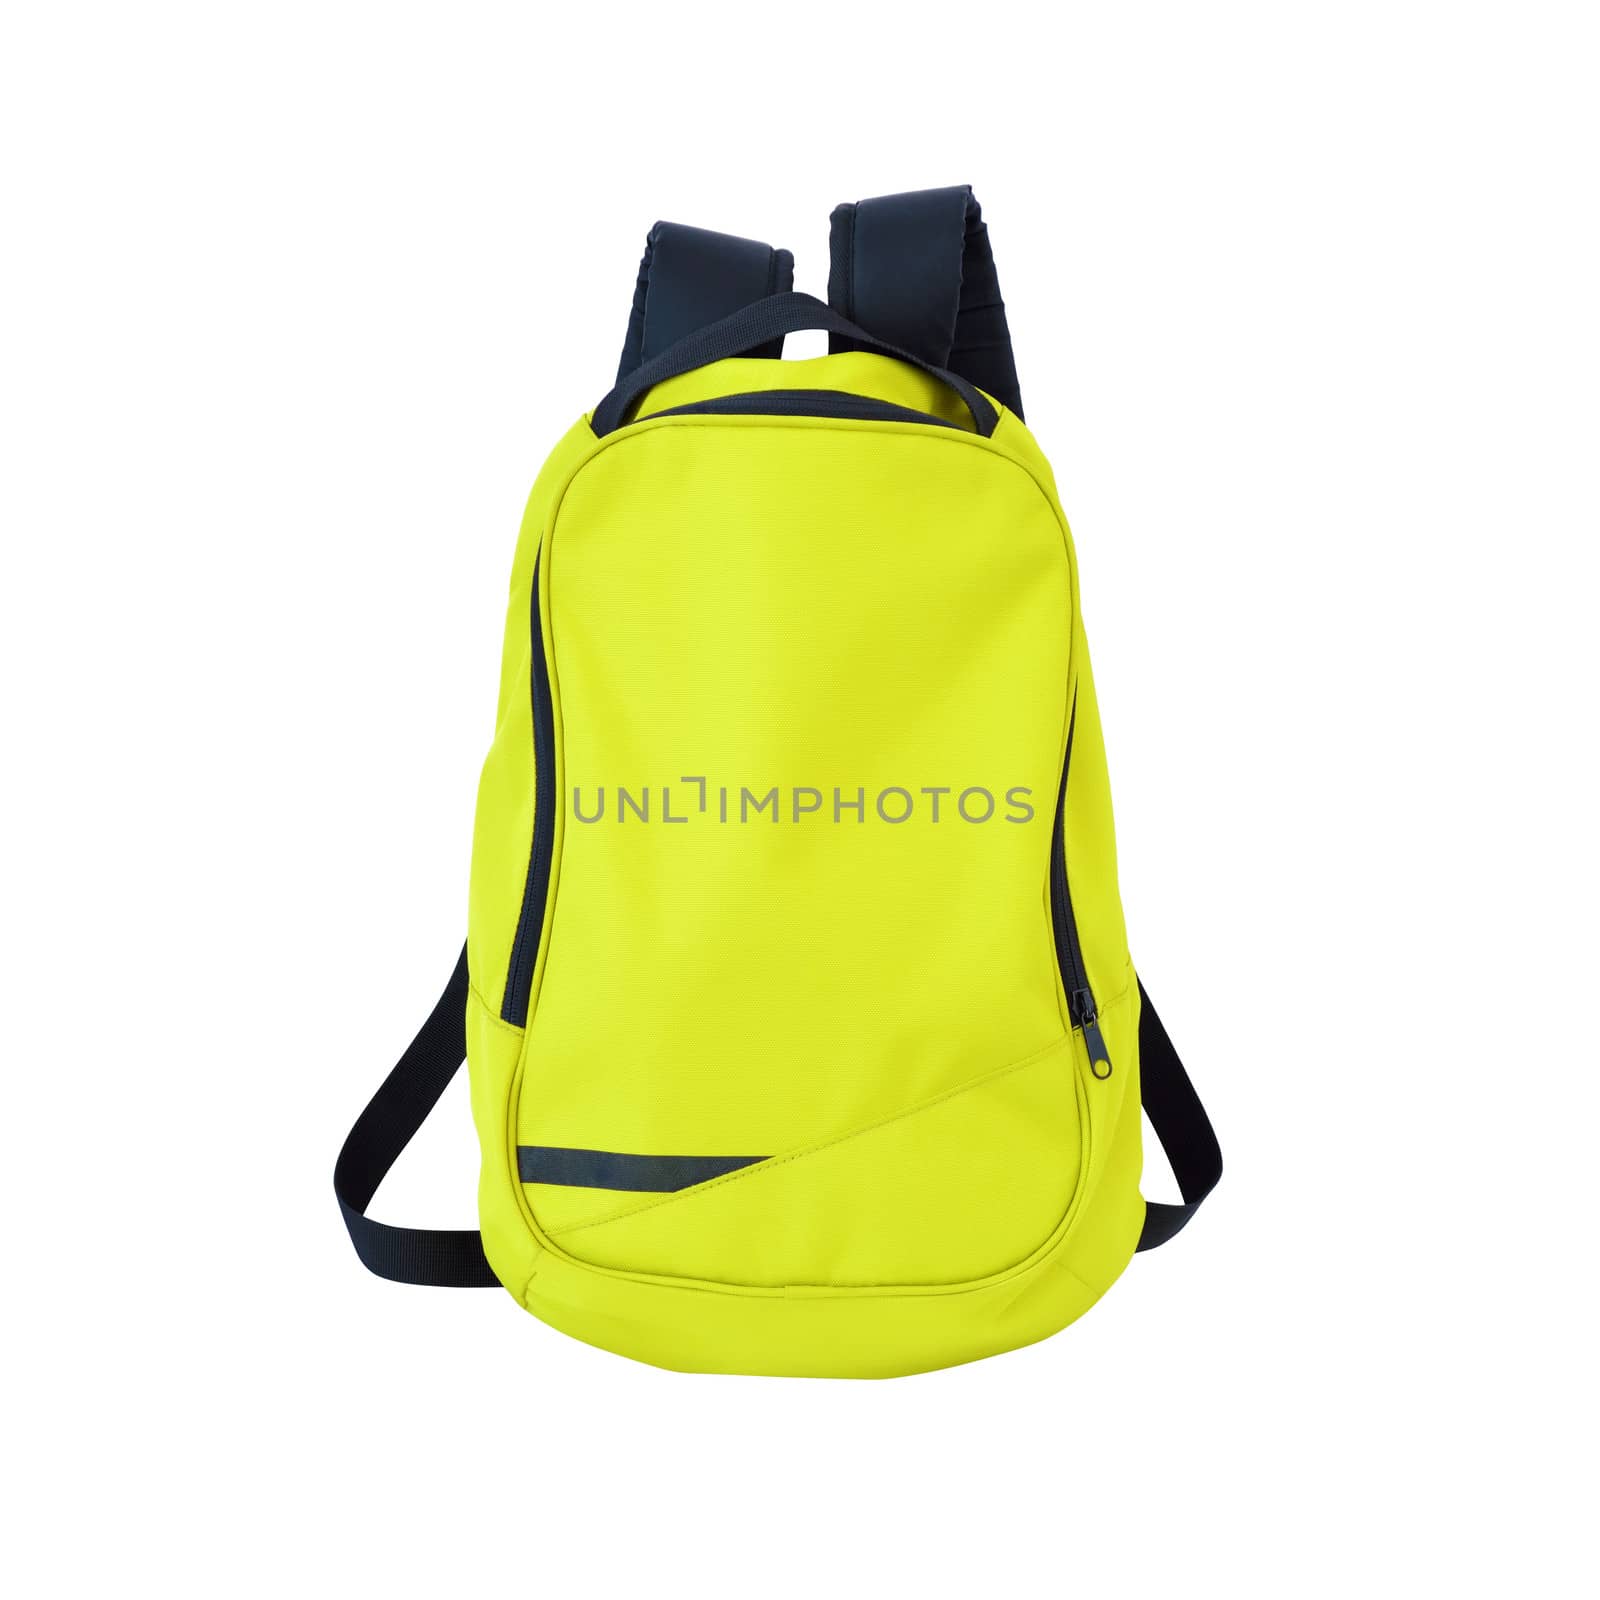 A high-resolution image of an isolated yellow-green colored rucksack on white background. High-quality clipping path included.